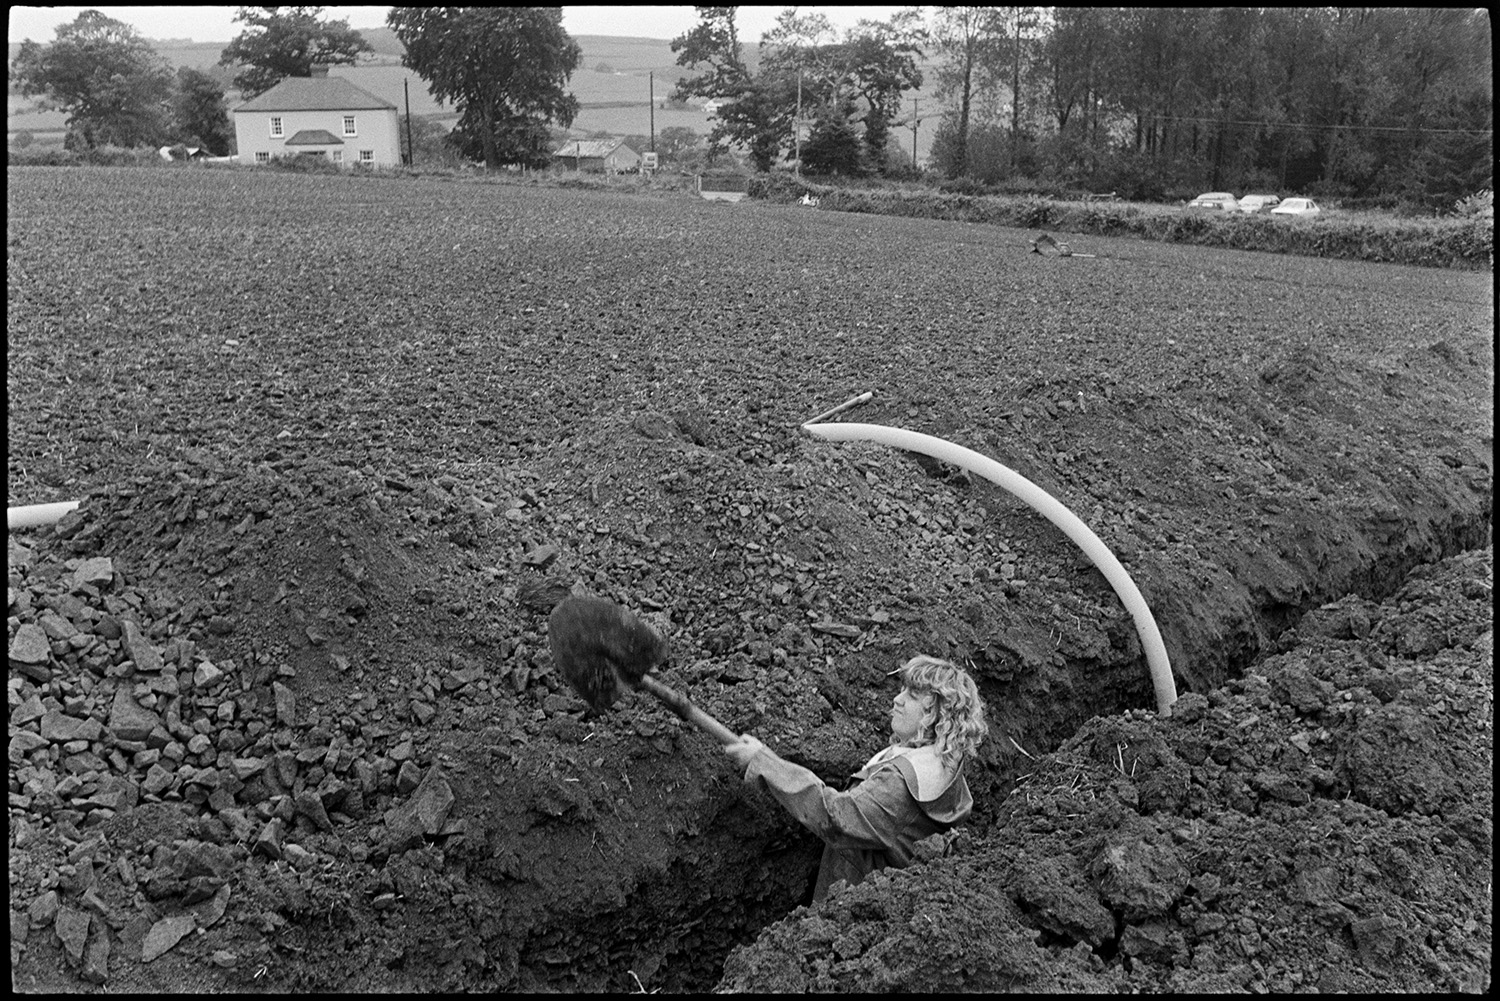 Farmer and daughter, woman, laying drainage pipe in ploughed field, tractor, JCB. 
[Rob Millman's daughter digging in a trench to lay a drainage pipe in a ploughed field near Leigh Cross, Chulmleigh. A house and parked cars are visible in the background.]